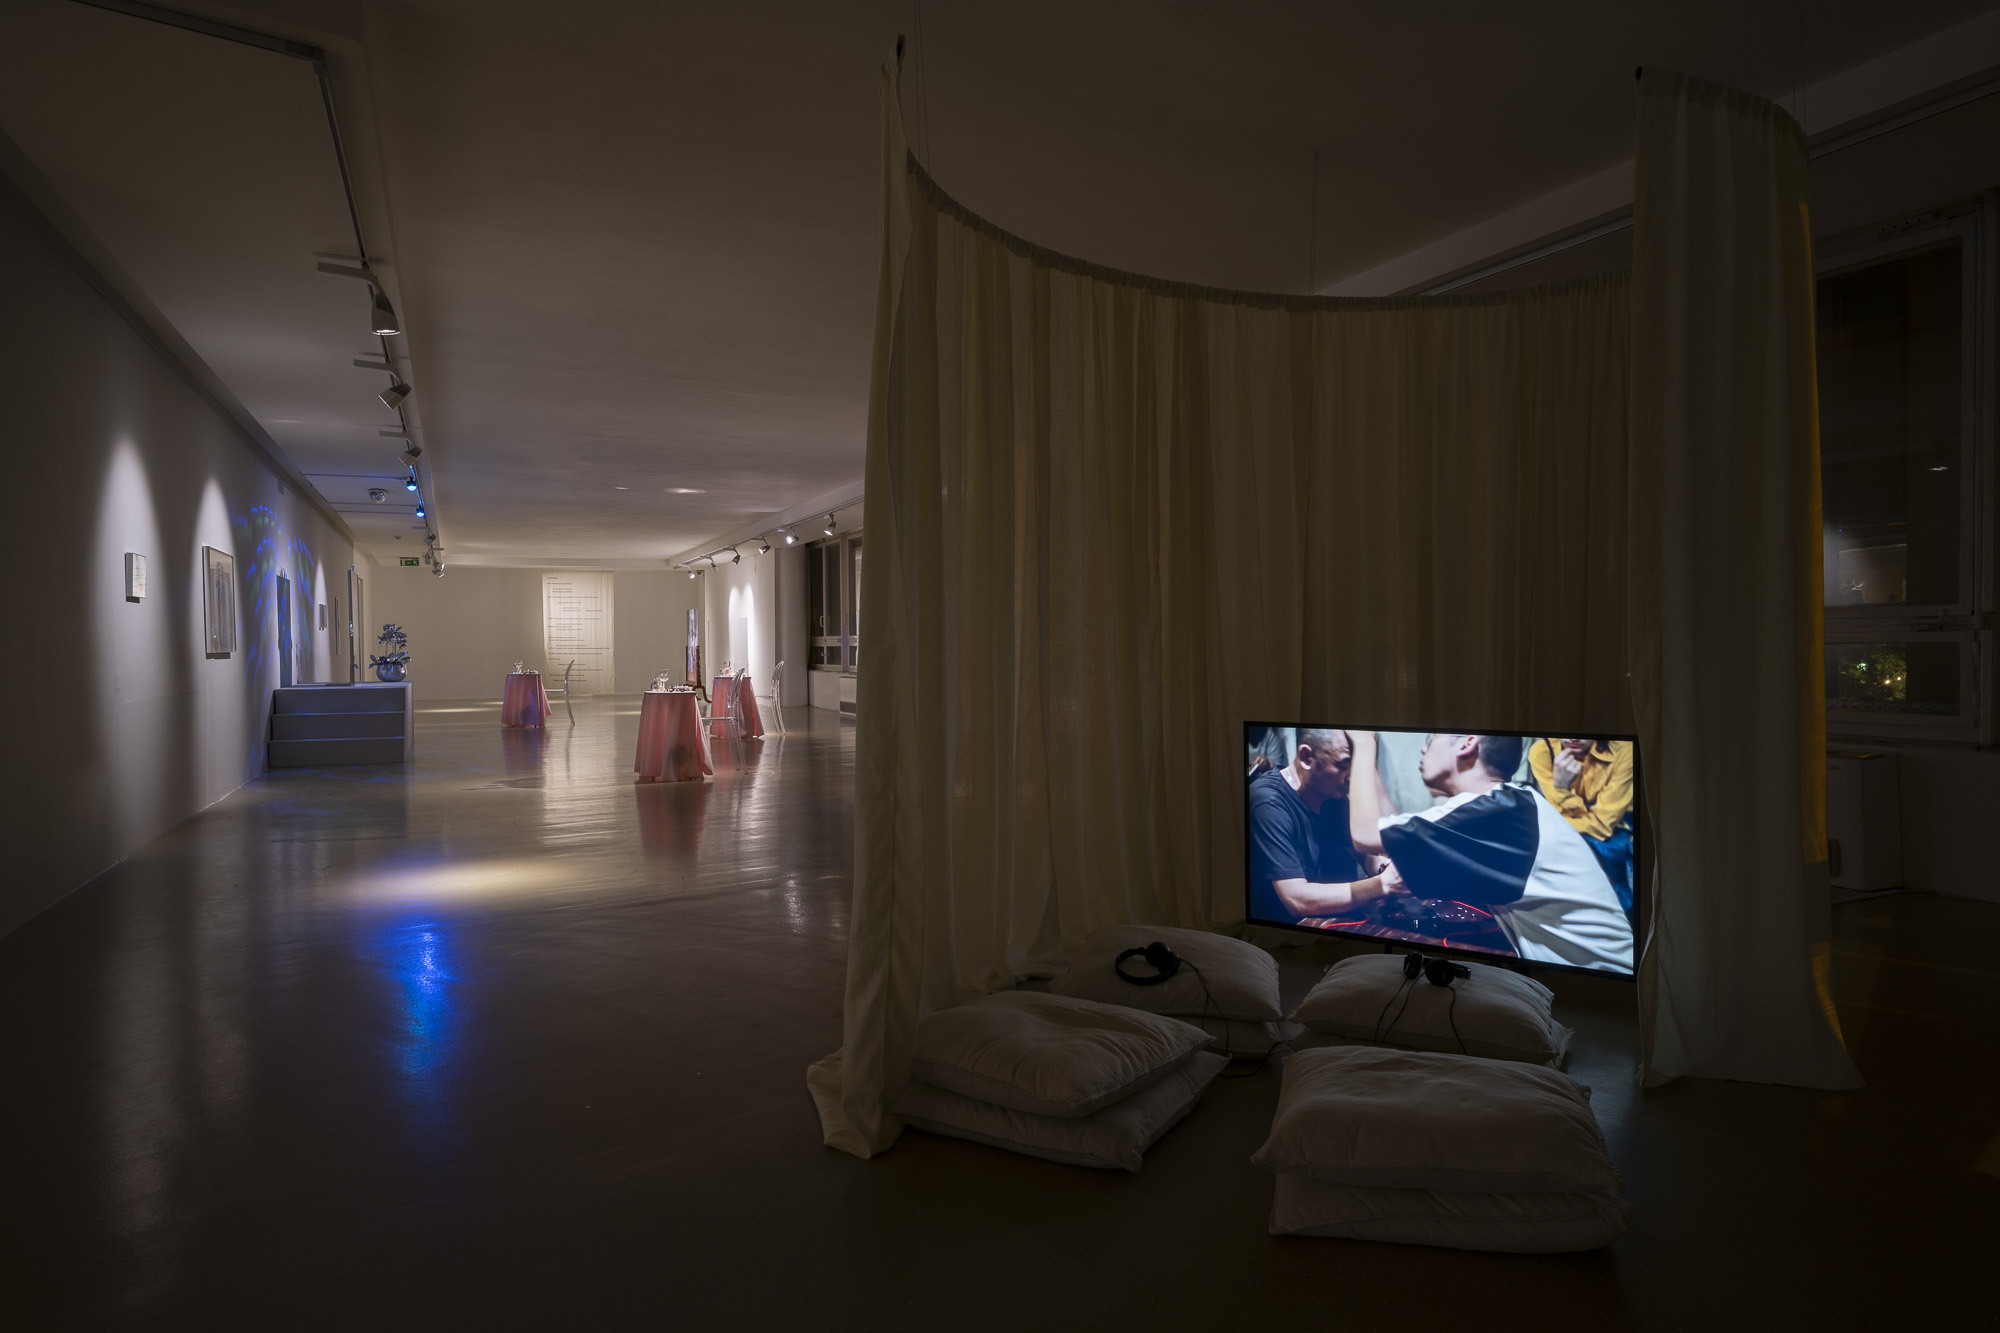 Installation view of the exhibition “Nhớ: Space Between One End and the Other”, Kunsthalle Bratislava, 2023, Photo: Adam Šakový